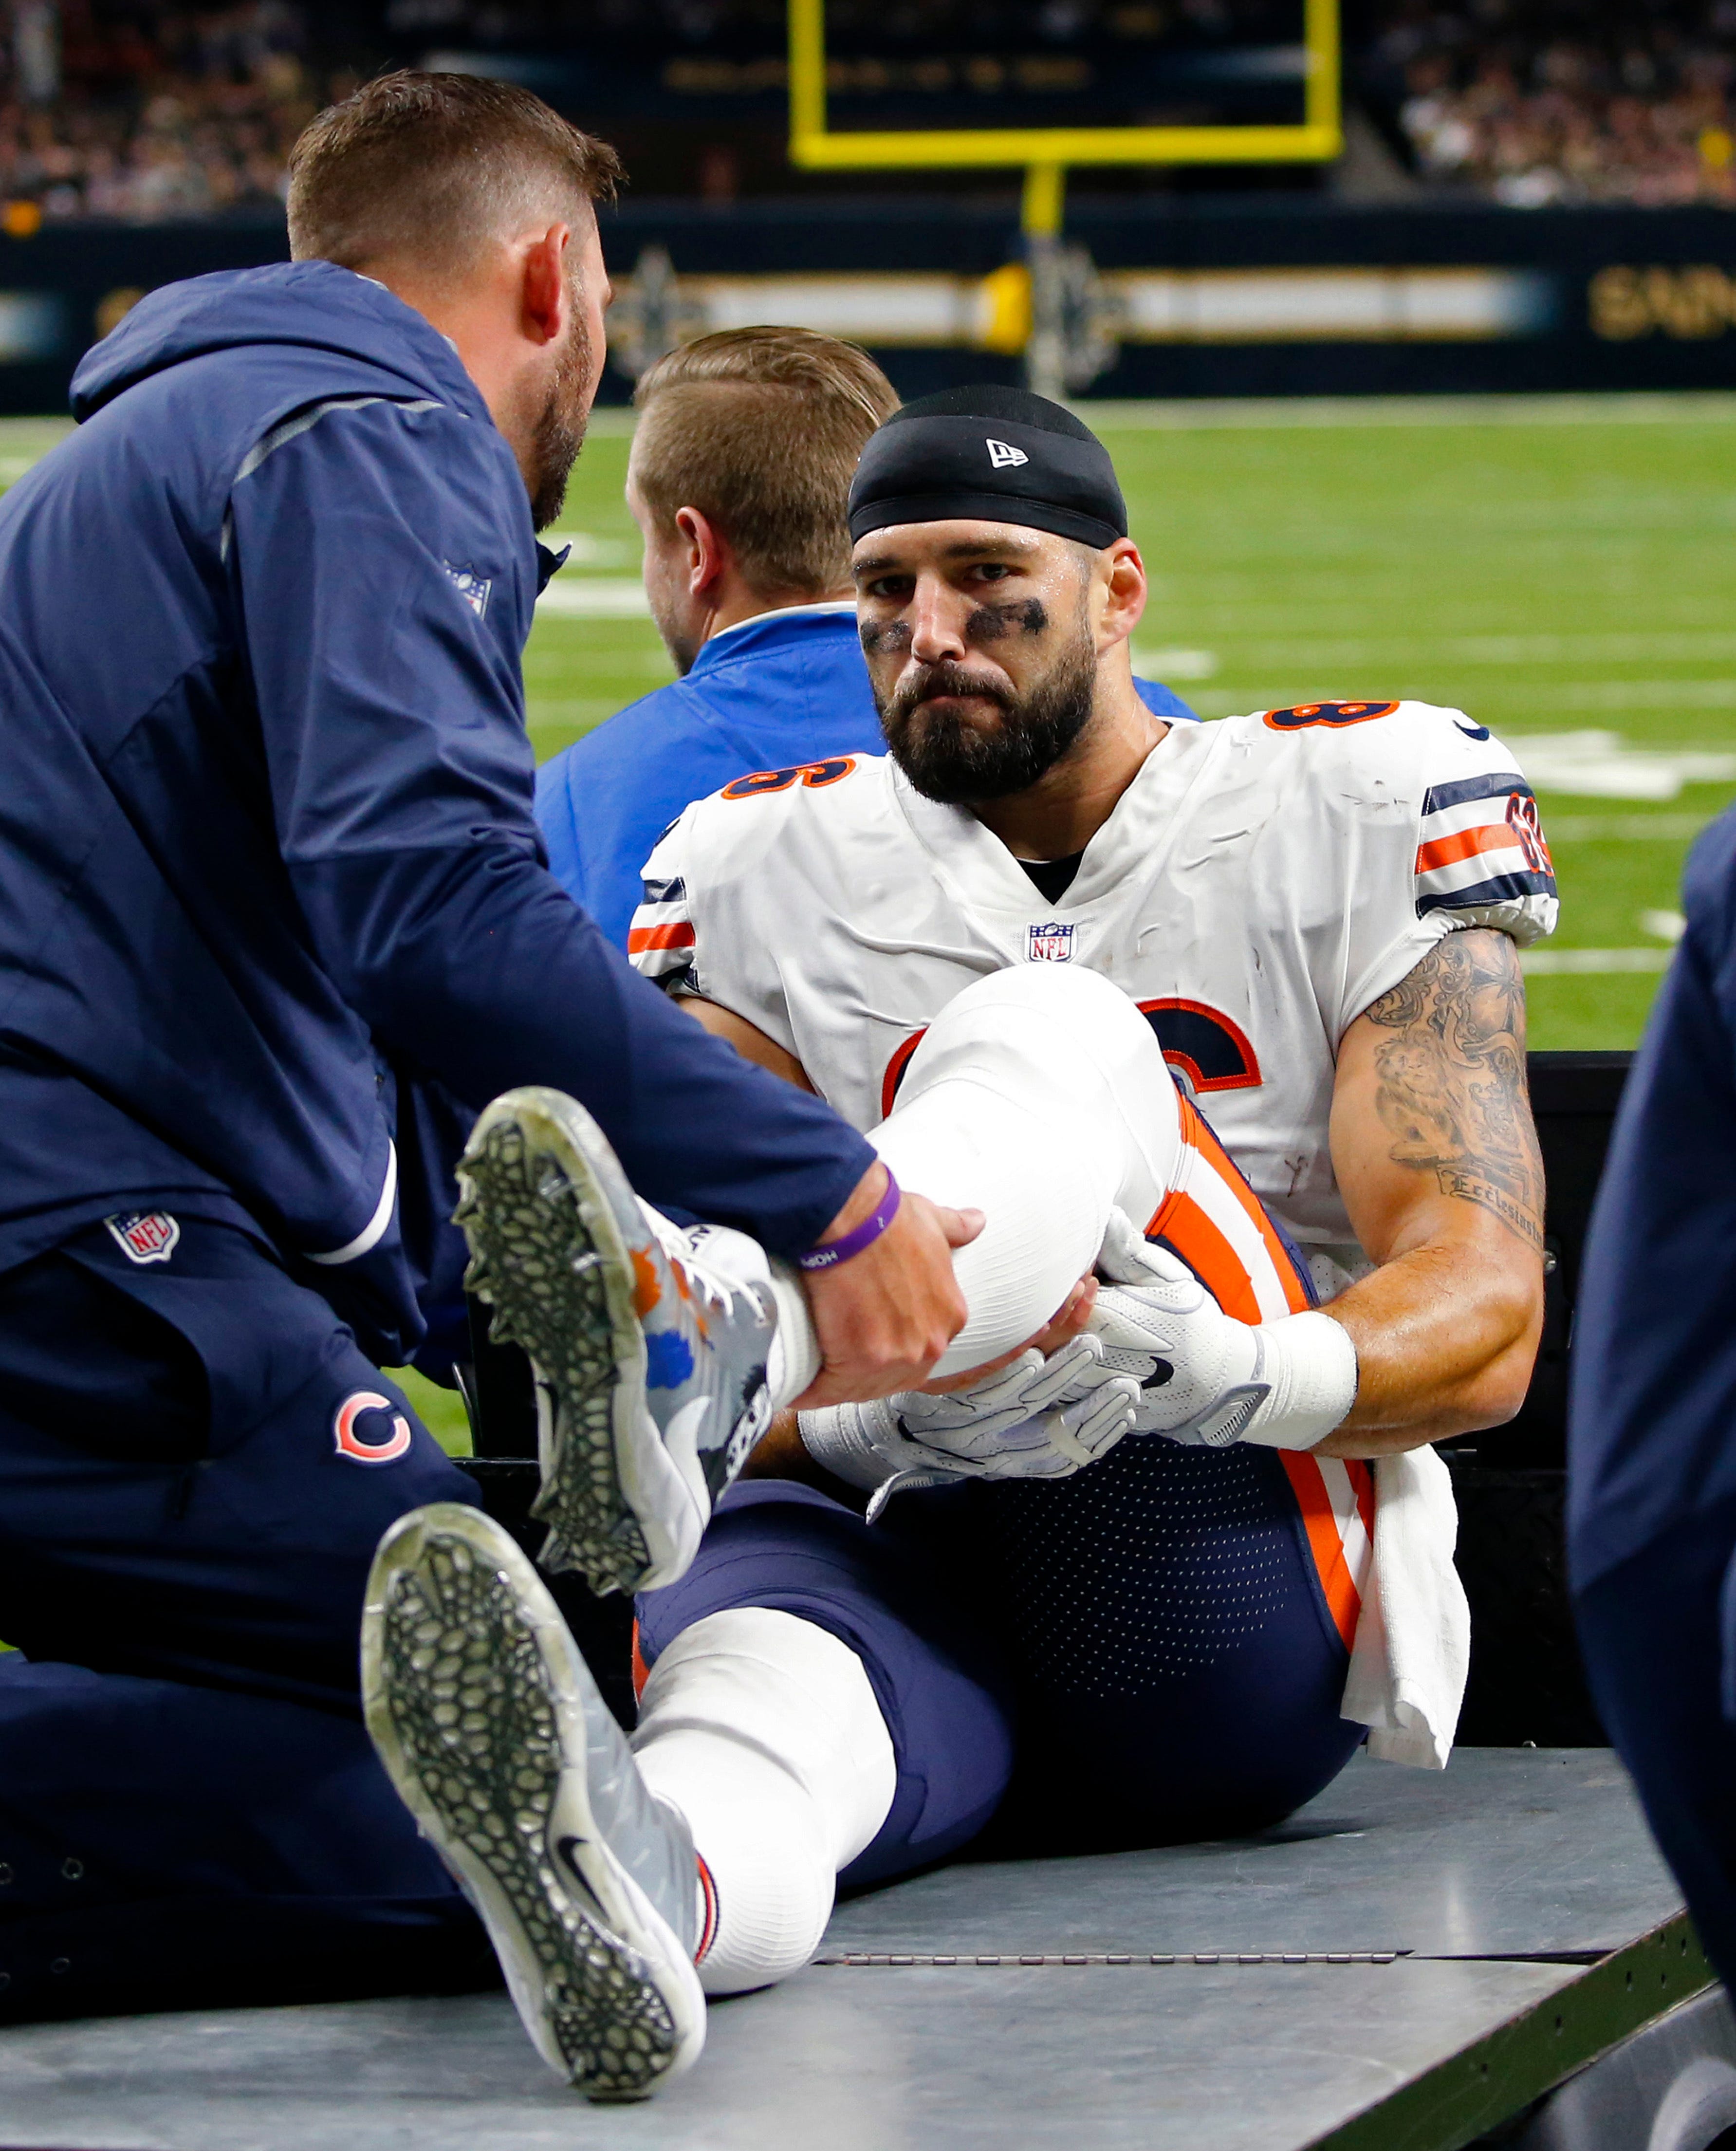 Chicago Bears re-sign Zach Miller to one-year contract after horrific knee injury